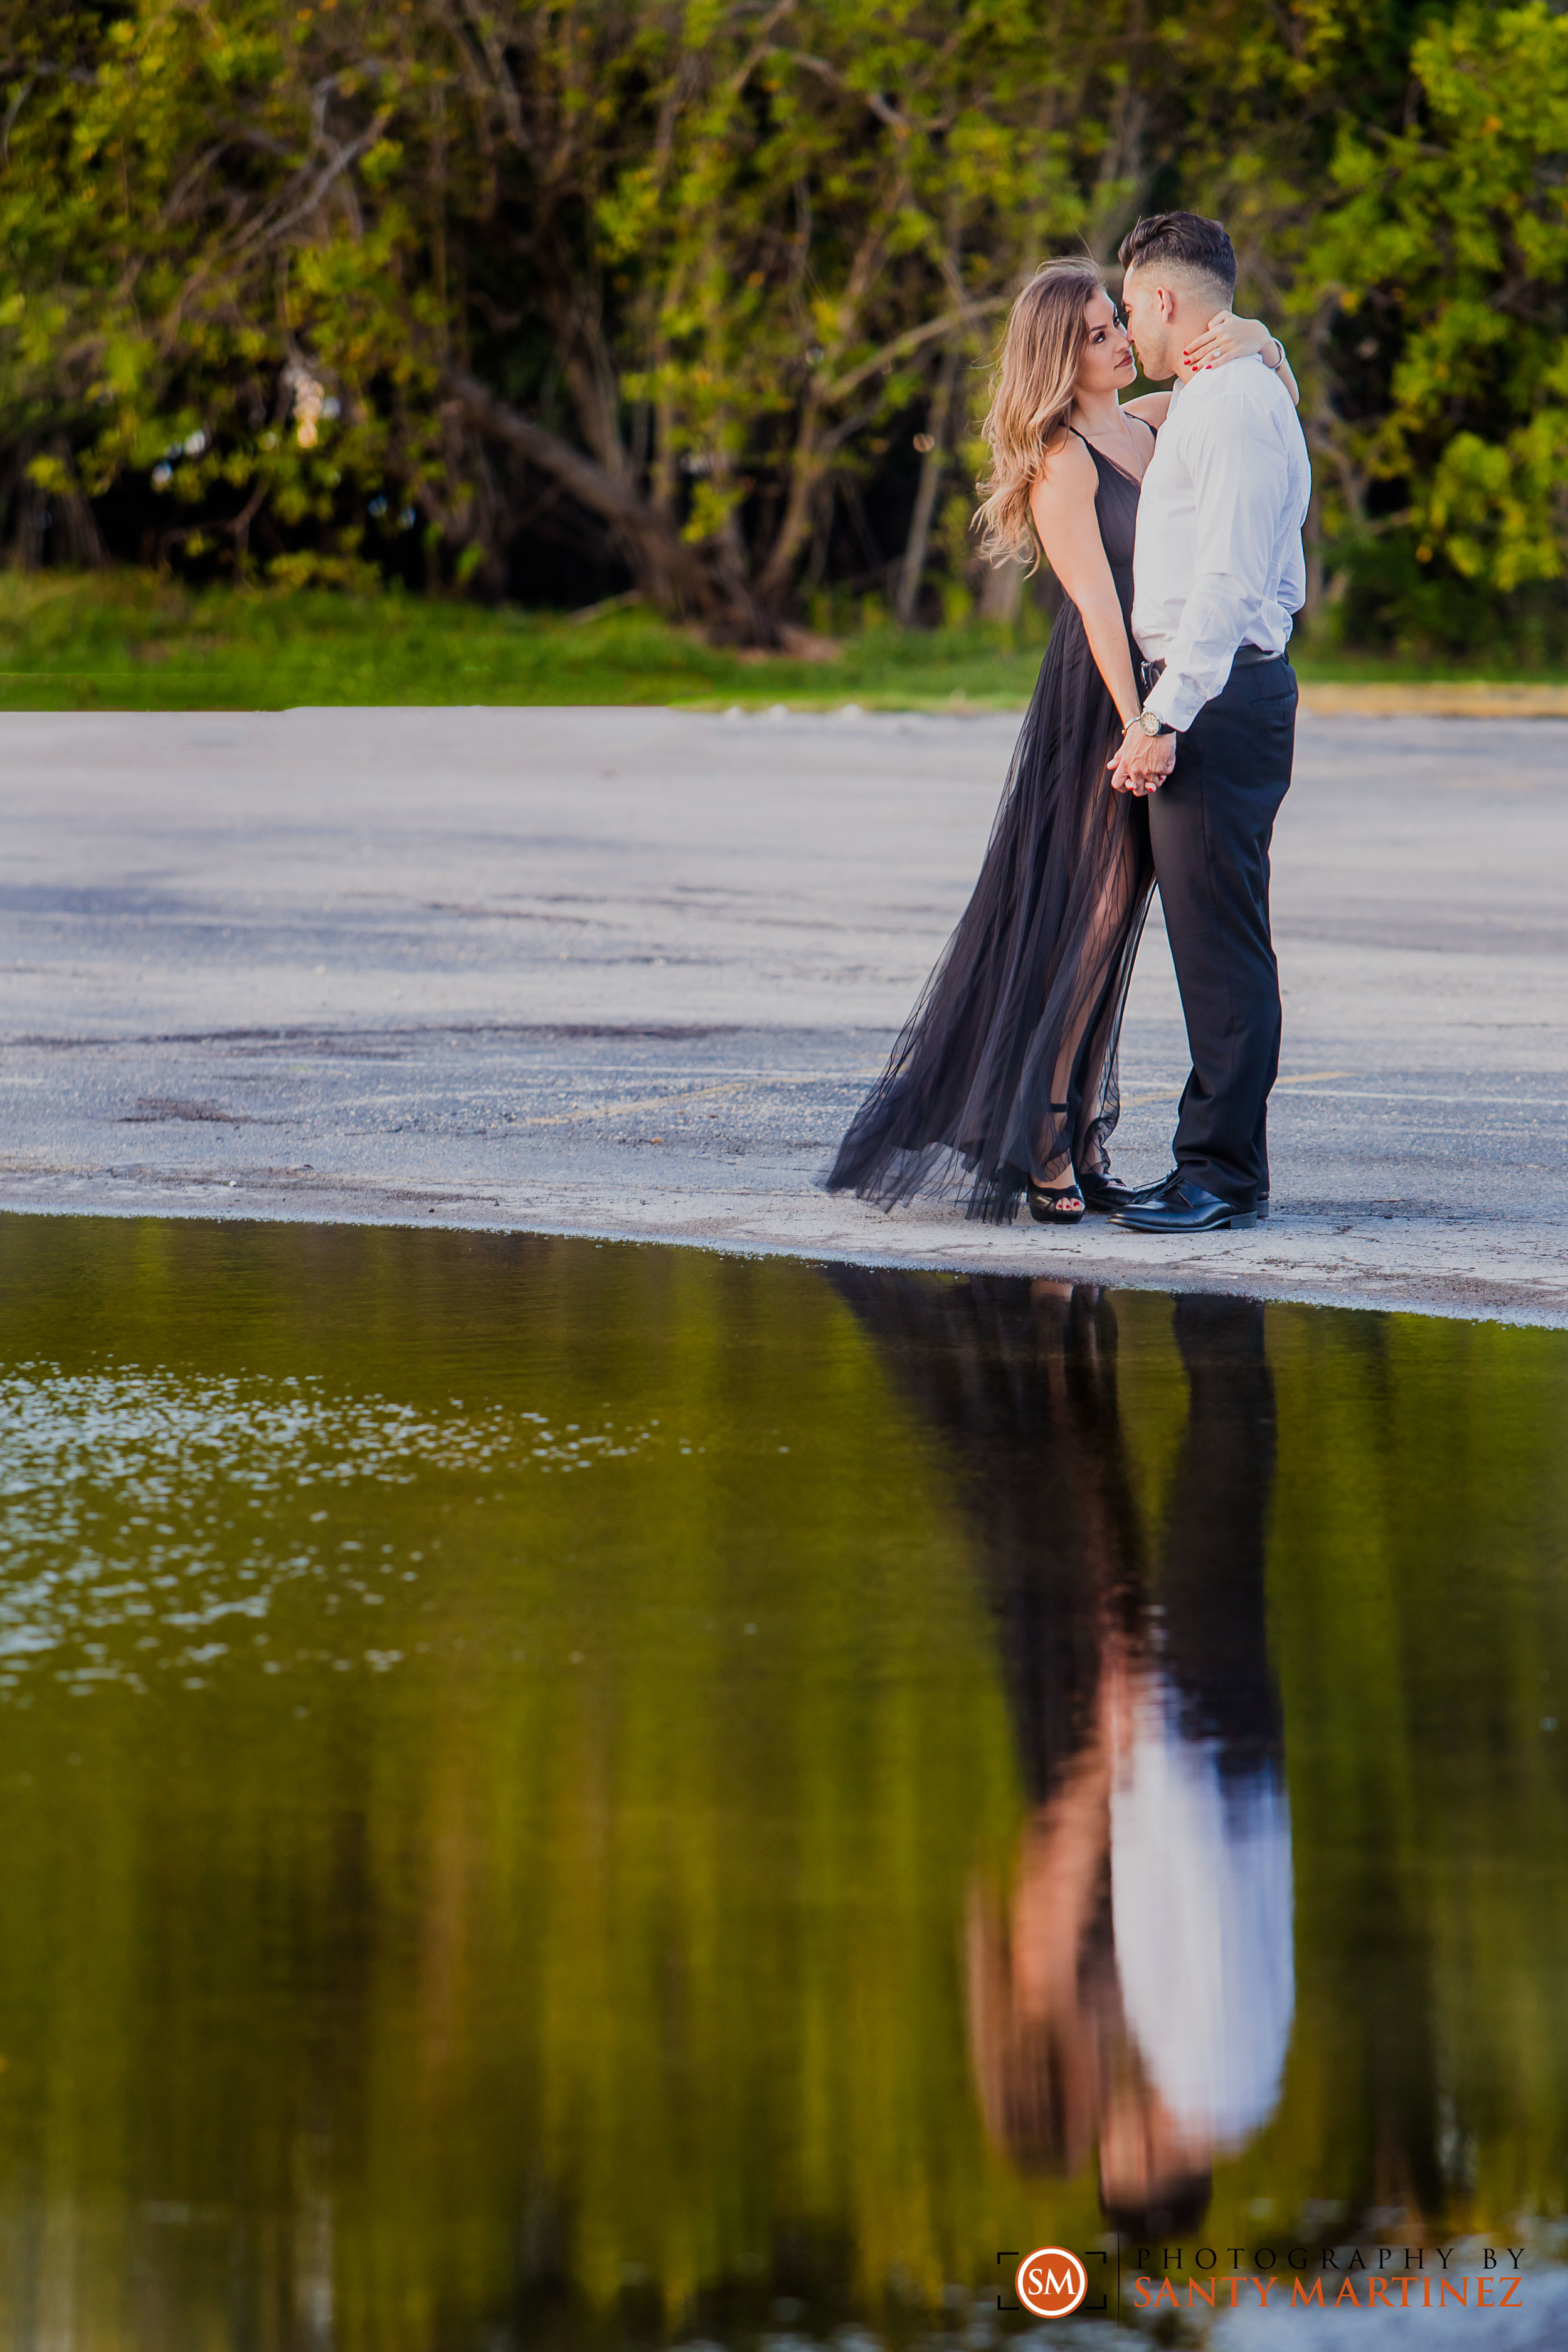 Miami Firefighter Engagement Session - Photography by Santy Martinez-21.jpg